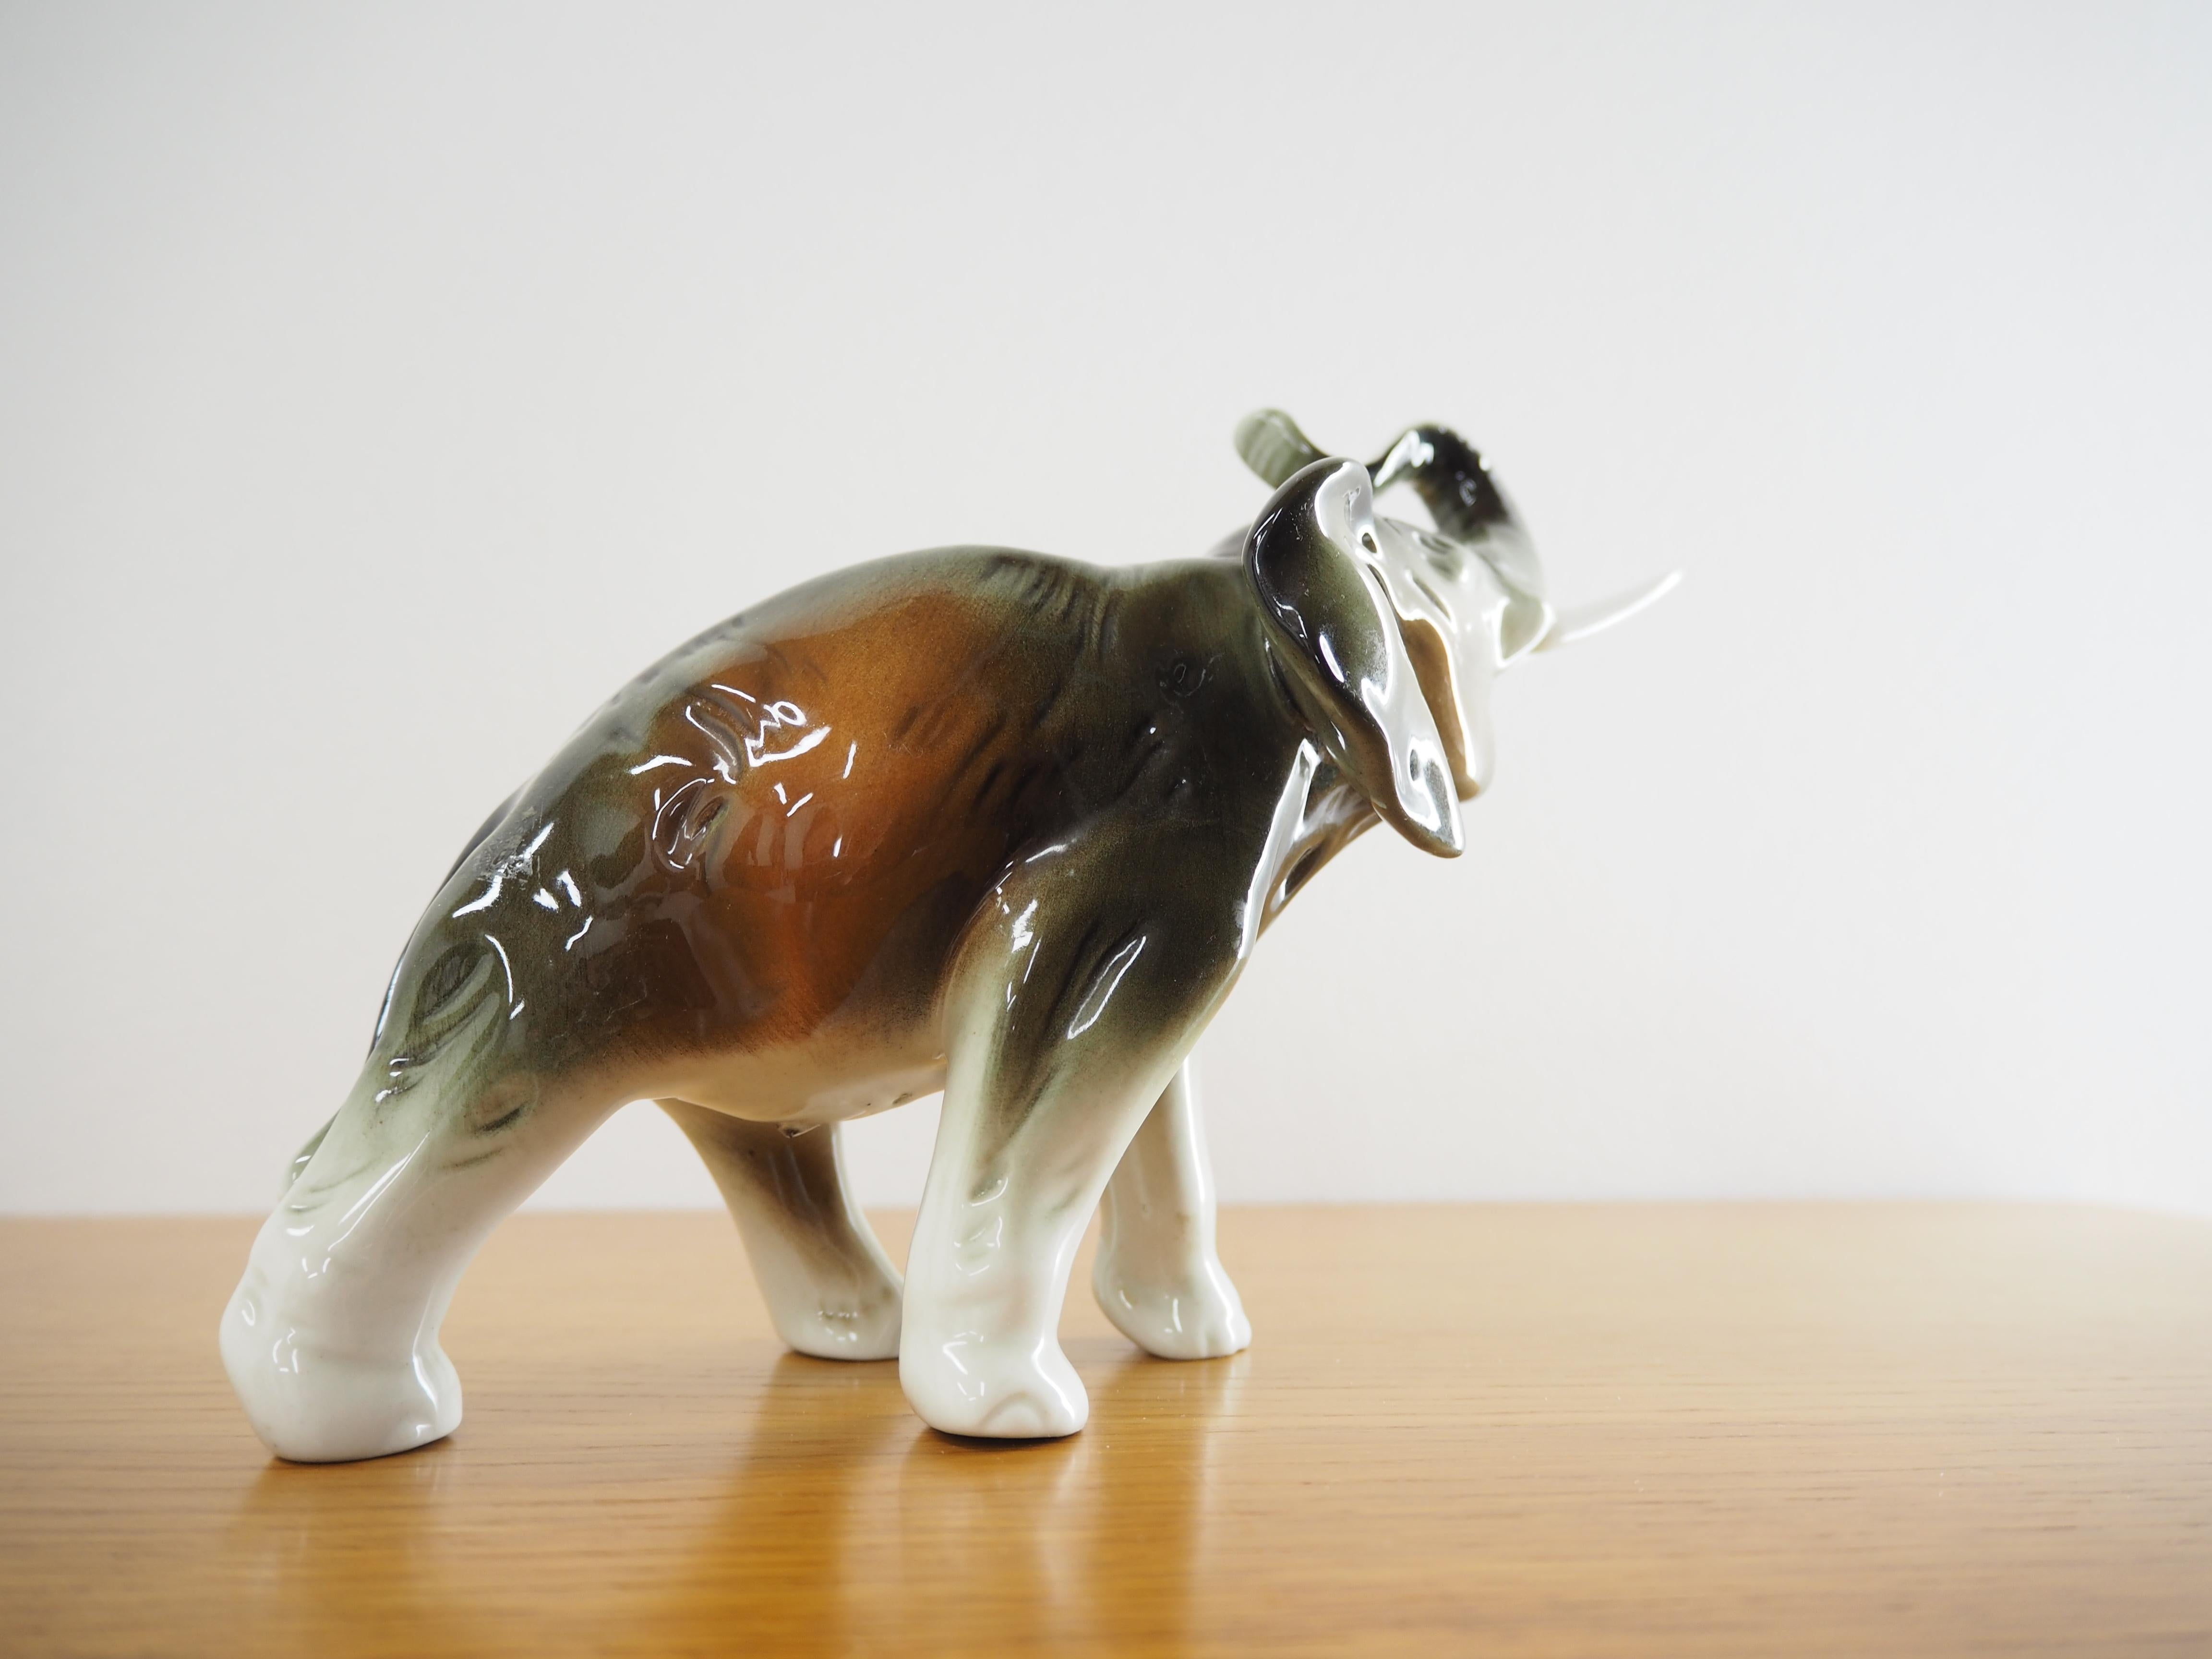 Mid-20th Century Midcentury Porcelain Sculpture of Elephant from Royal Dux, 1960s